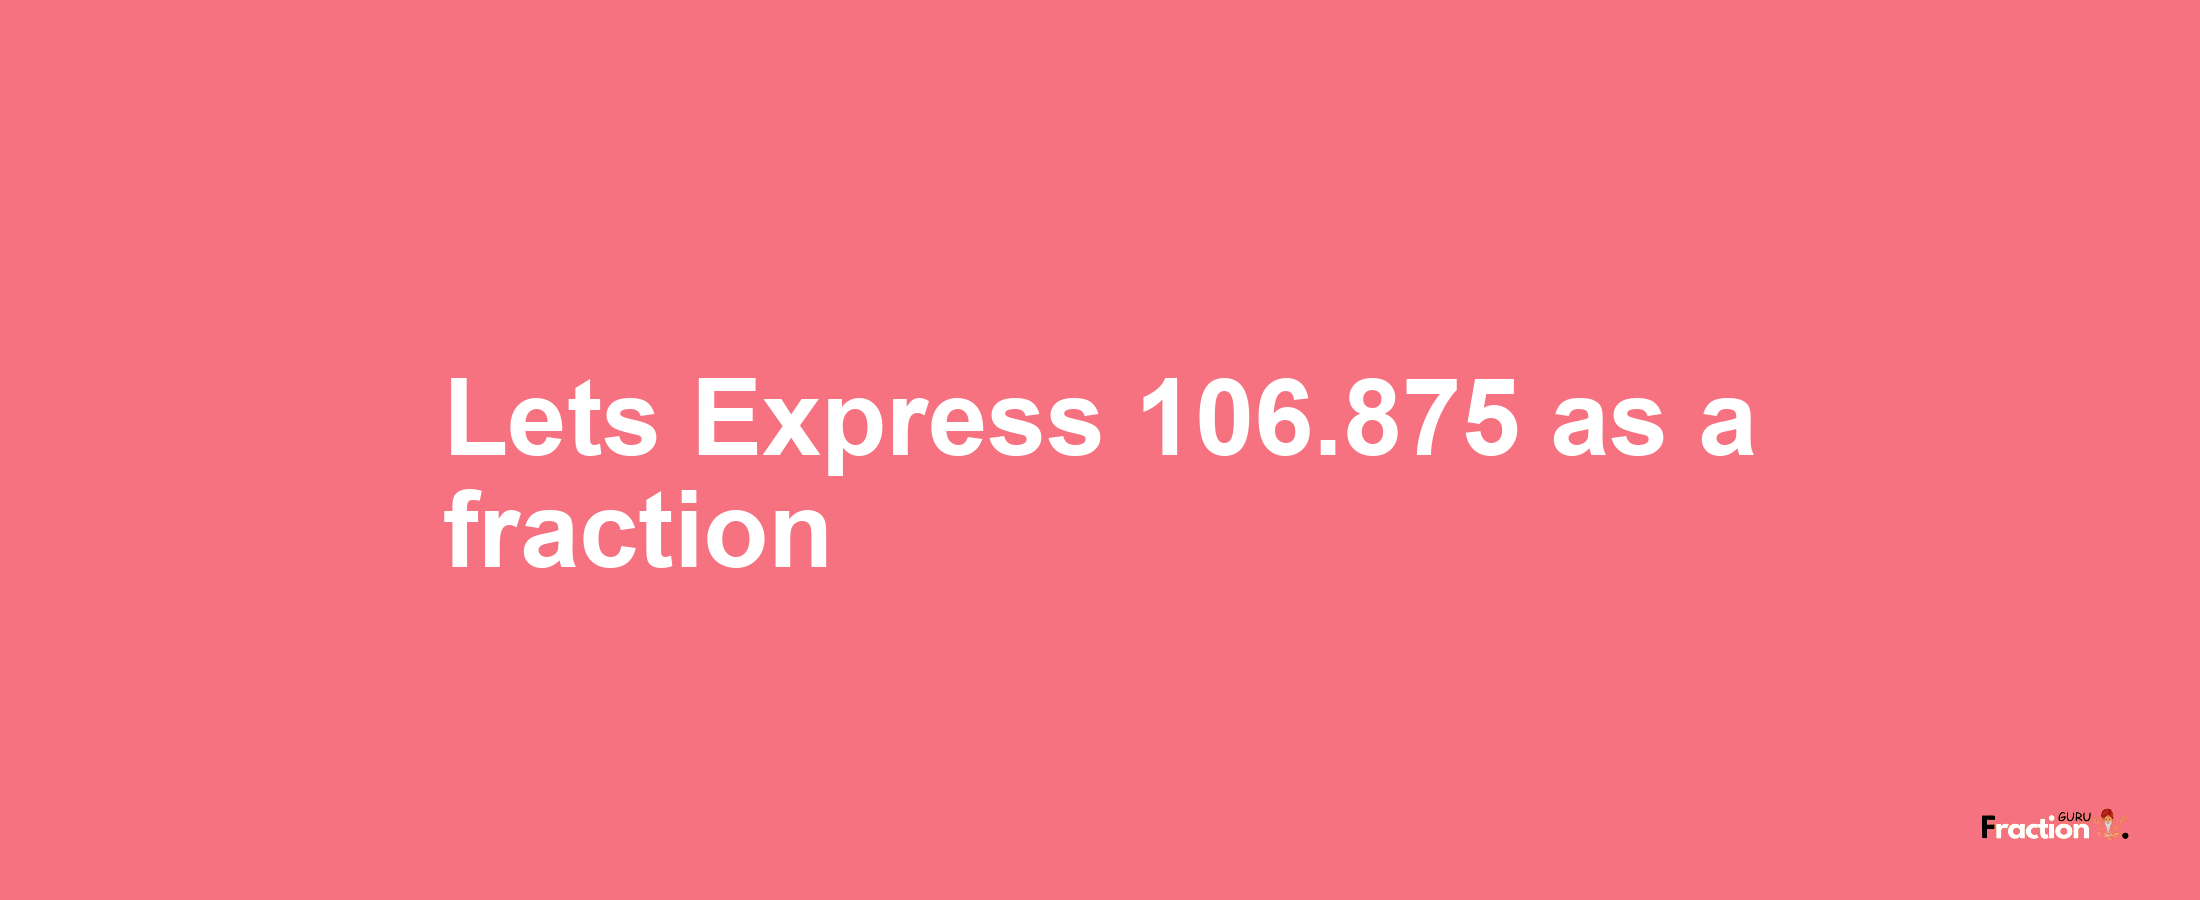 Lets Express 106.875 as afraction